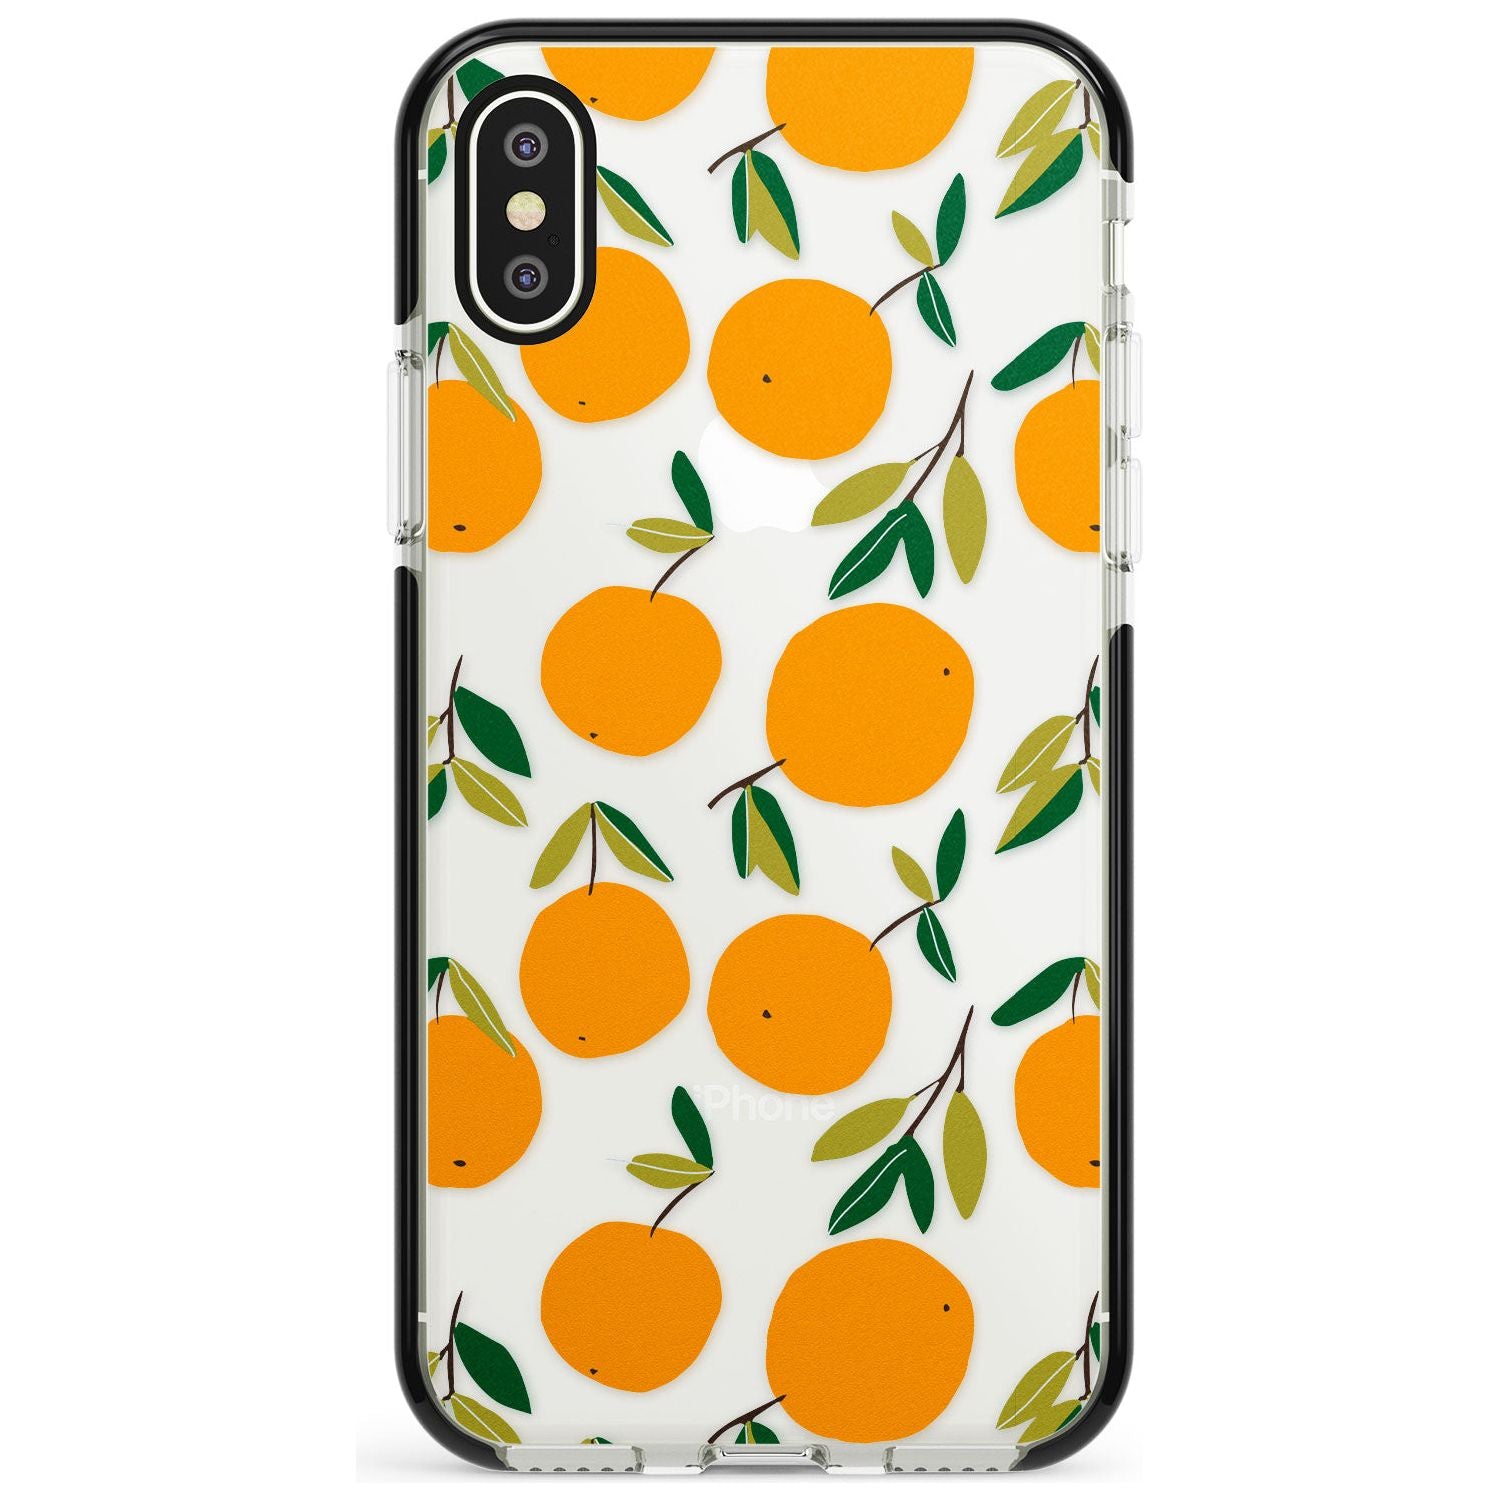 Oranges Pattern Black Impact Phone Case for iPhone X XS Max XR